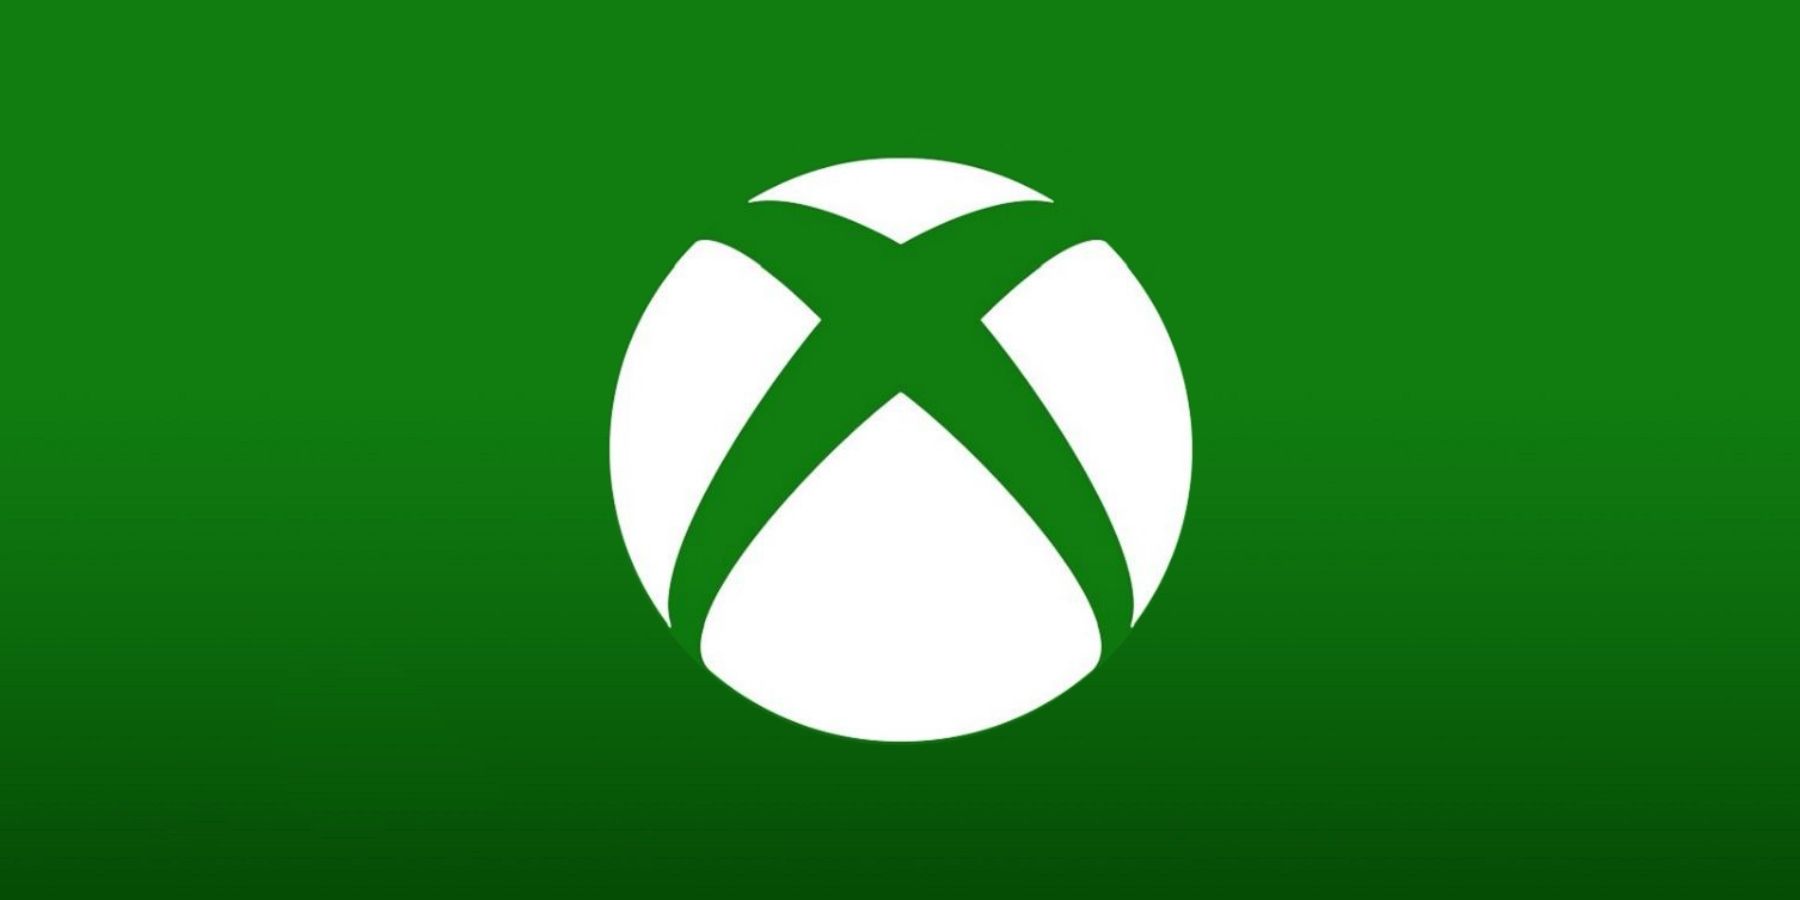 xbox game pass logo with green background 1